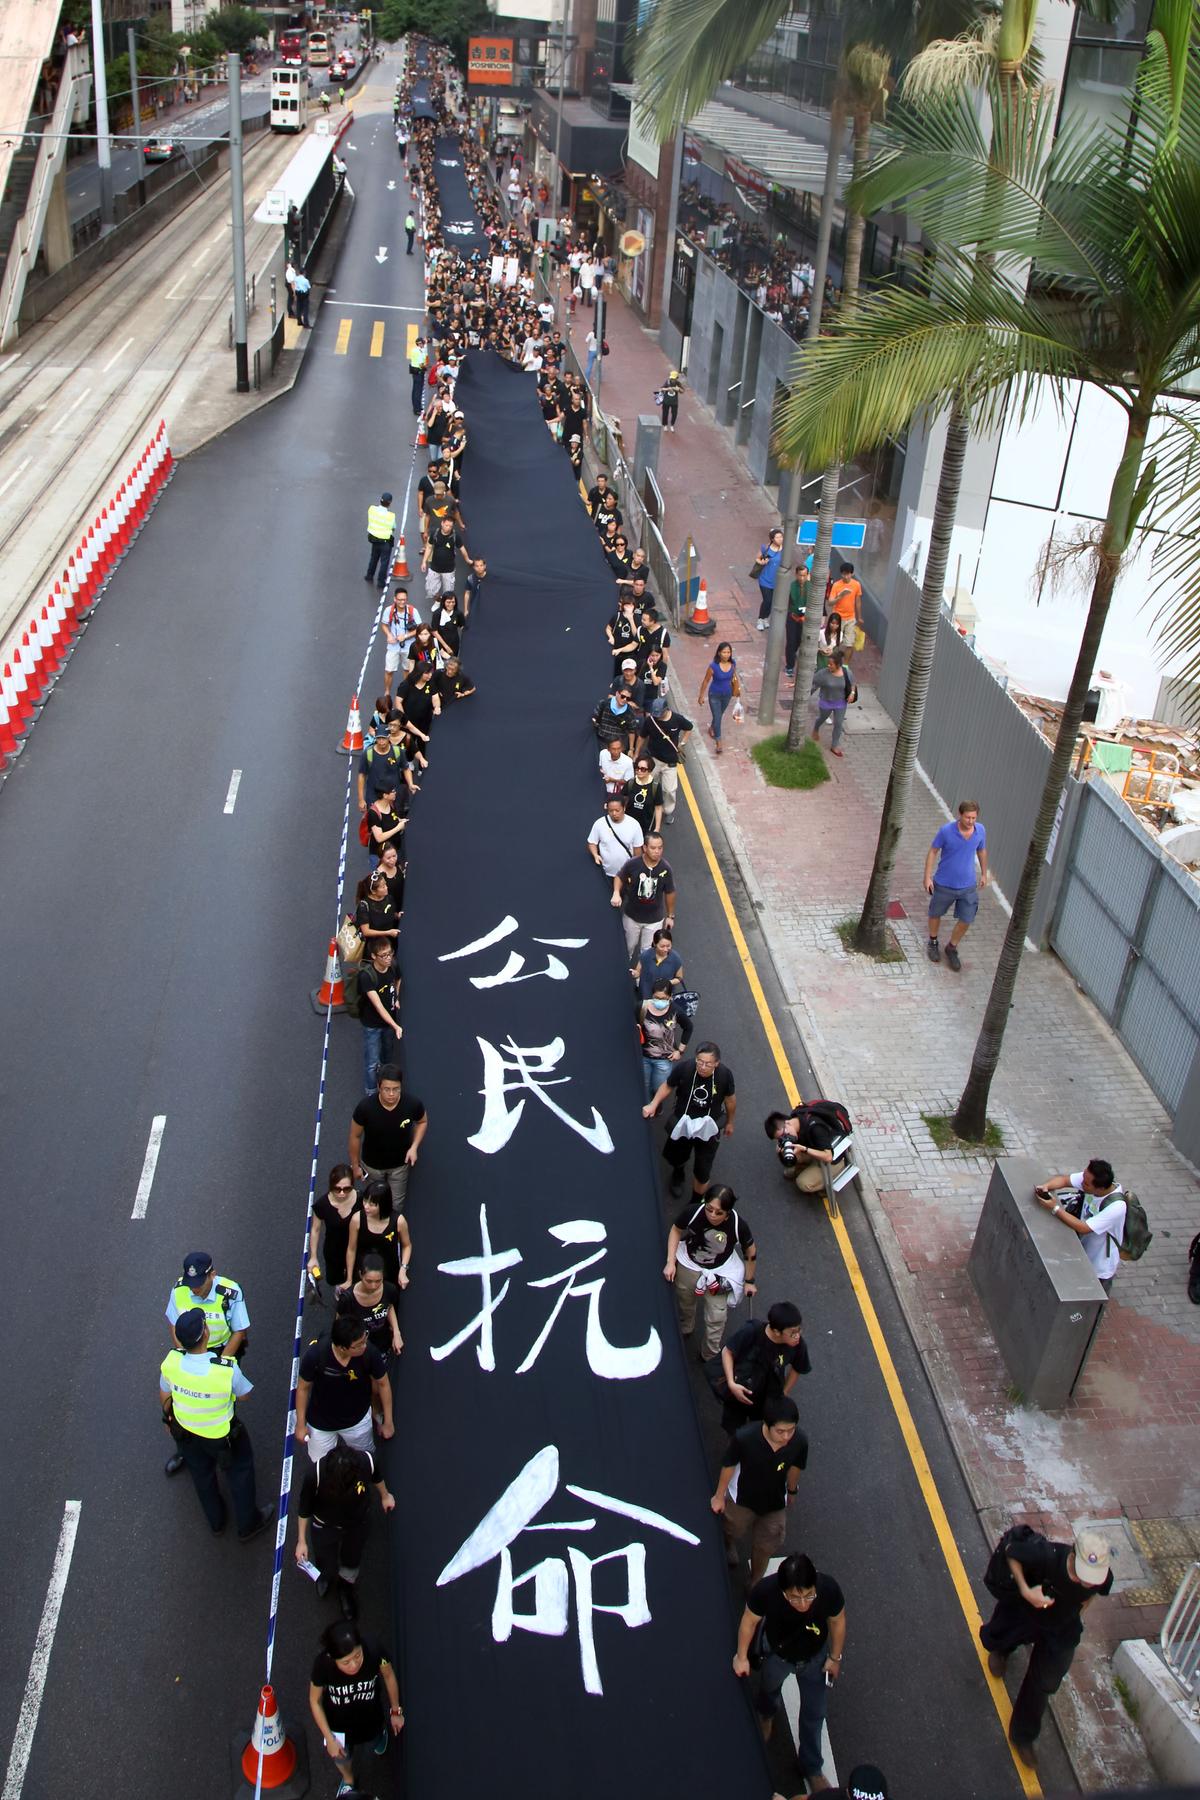 Protesters in black shirts hold a black banner that says "civil disobedience" in calling for universal suffrage in Hong Kong, on Sept. 14, 2014. 4000 supporters of Hong Kong's Occupy Central movement participated in the Black-Cloth March. (Pan Zaishu/Epoch Times)